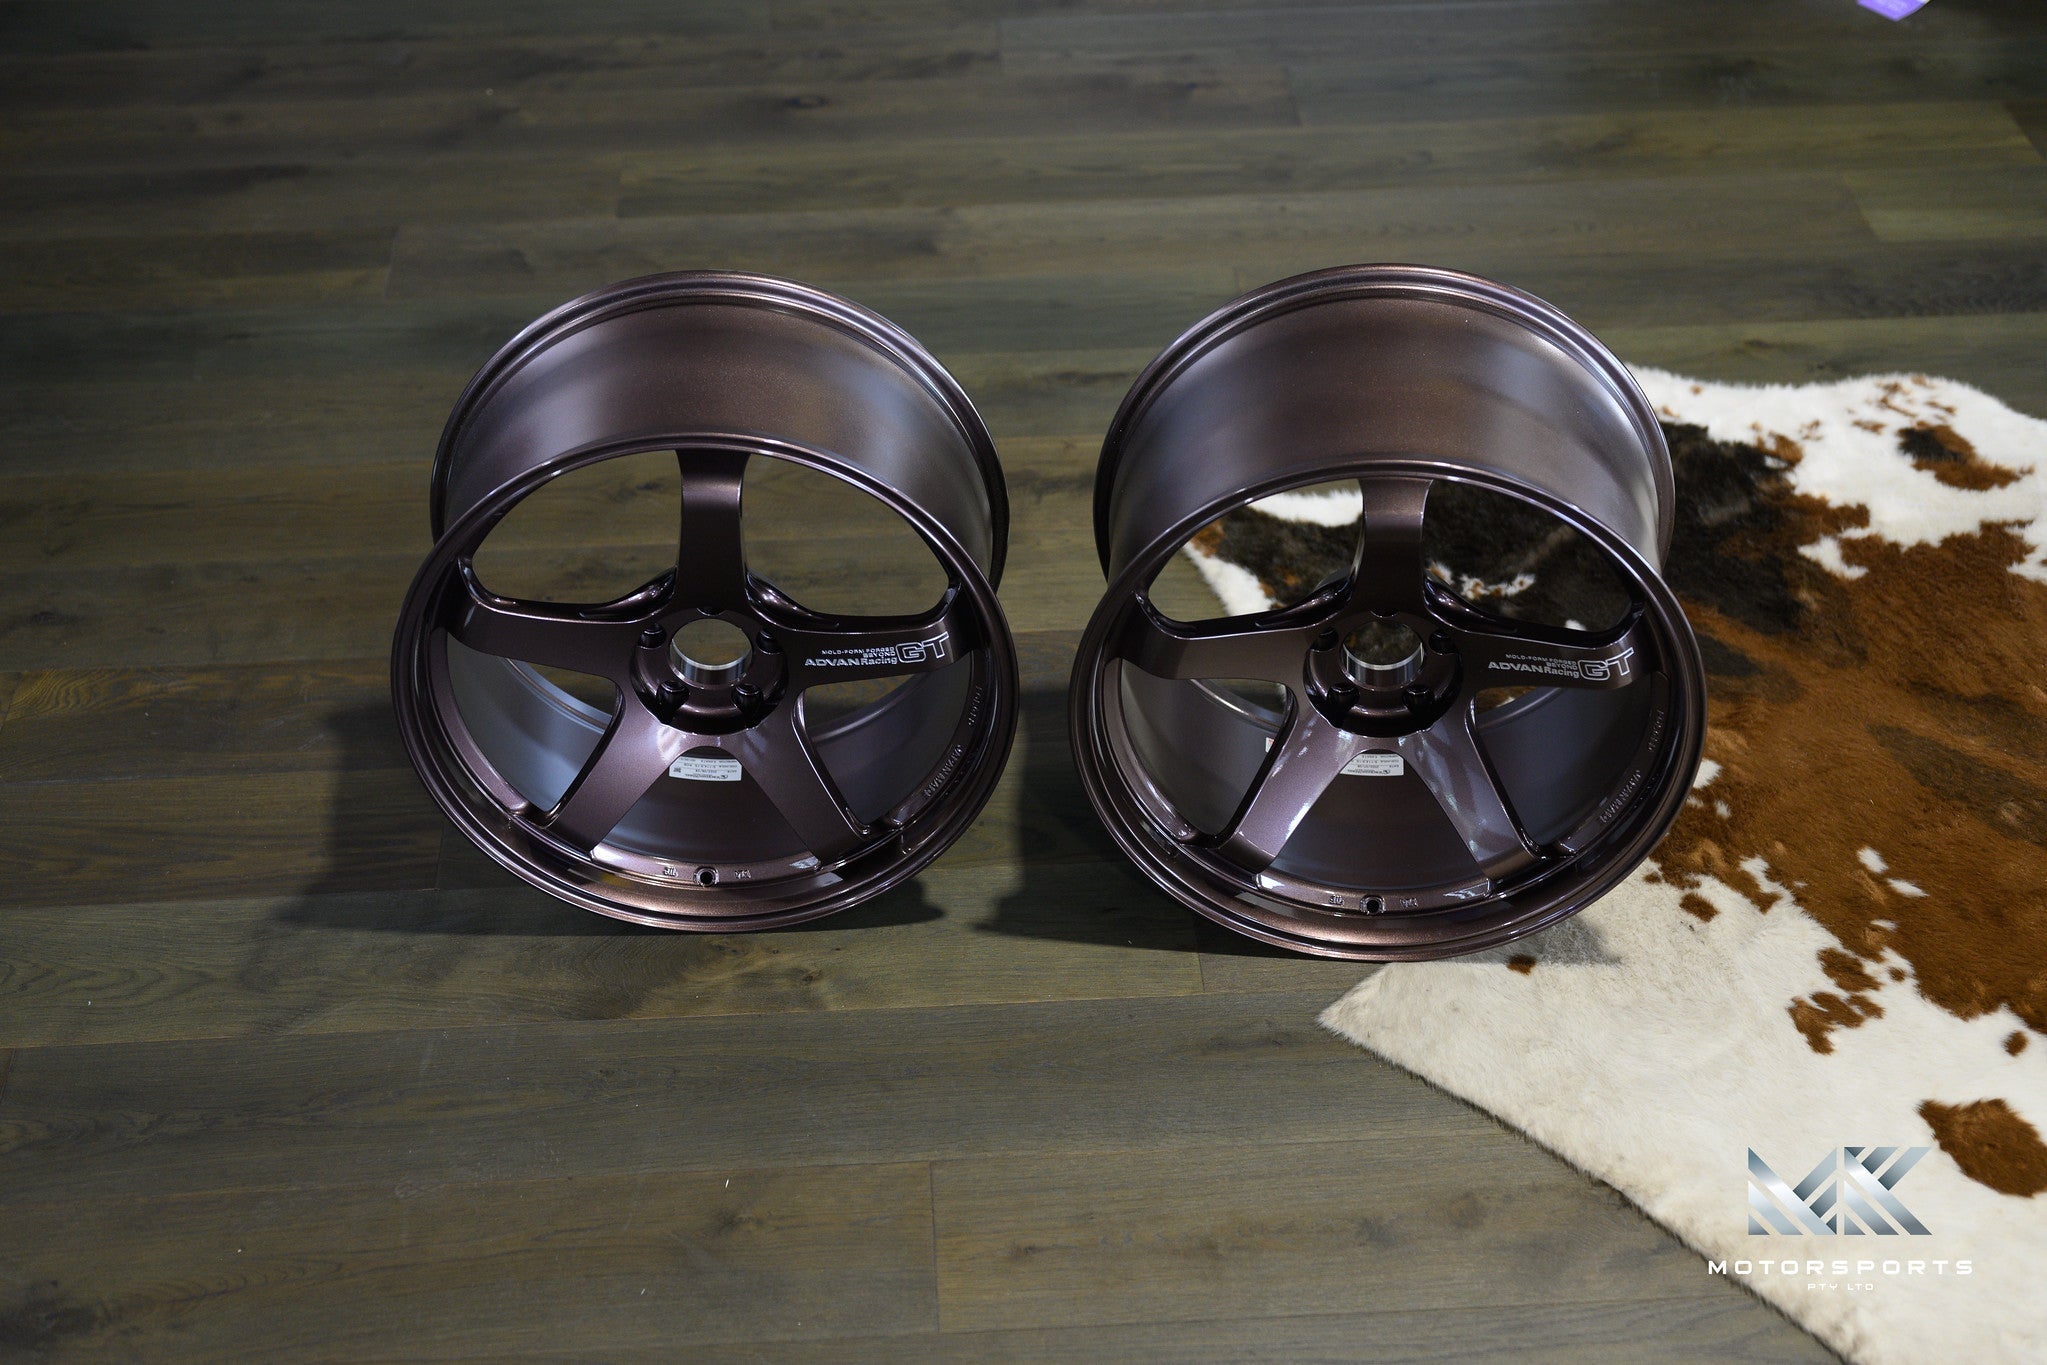 Advan GT Beyond R35 GT-R - Premium Wheels from Advan Racing - From just $6990.00! Shop now at MK MOTORSPORTS